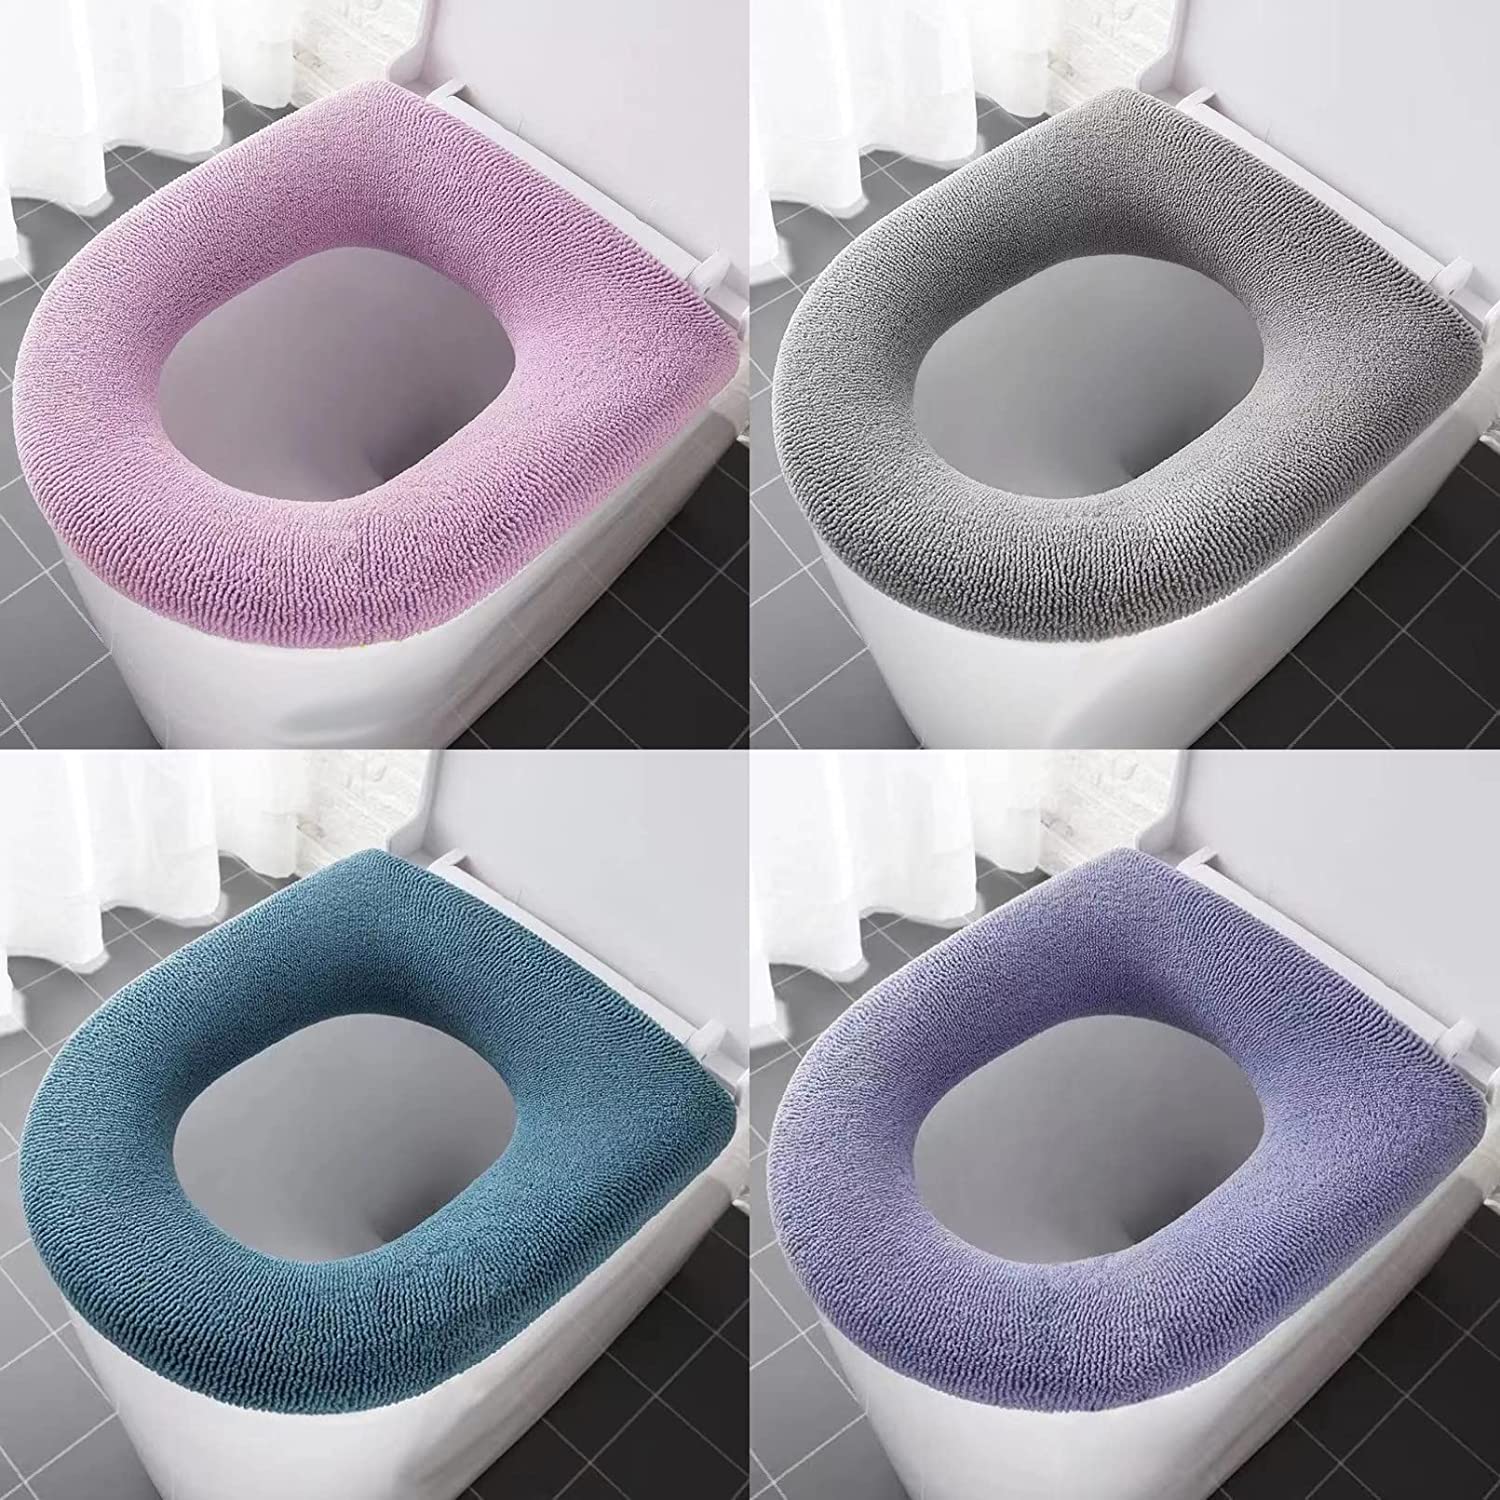 (🎄Christmas Sale - 49% OFF)Bathroom Toilet Seat Cover Pads🔥BUY 3 GET 2 FREE(5 PCS)🔥